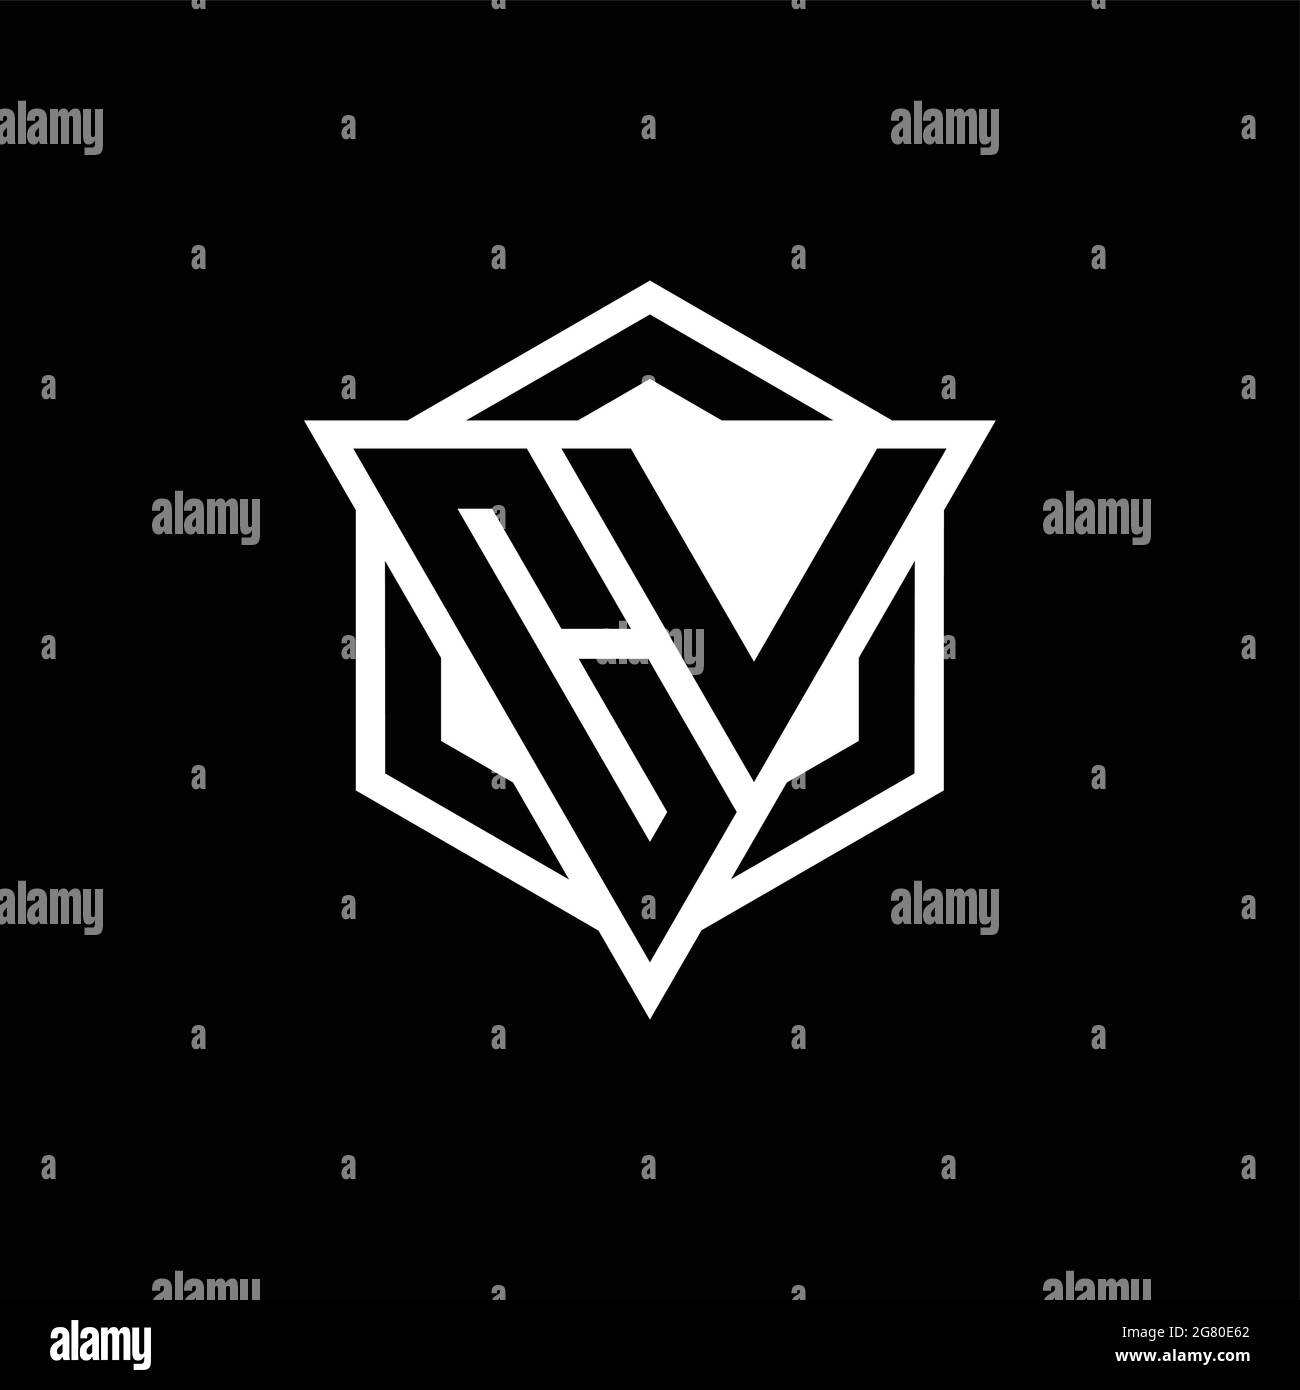 CV logo monogram with triangle and hexagon shape combination isolated on back and white colors Stock Vector